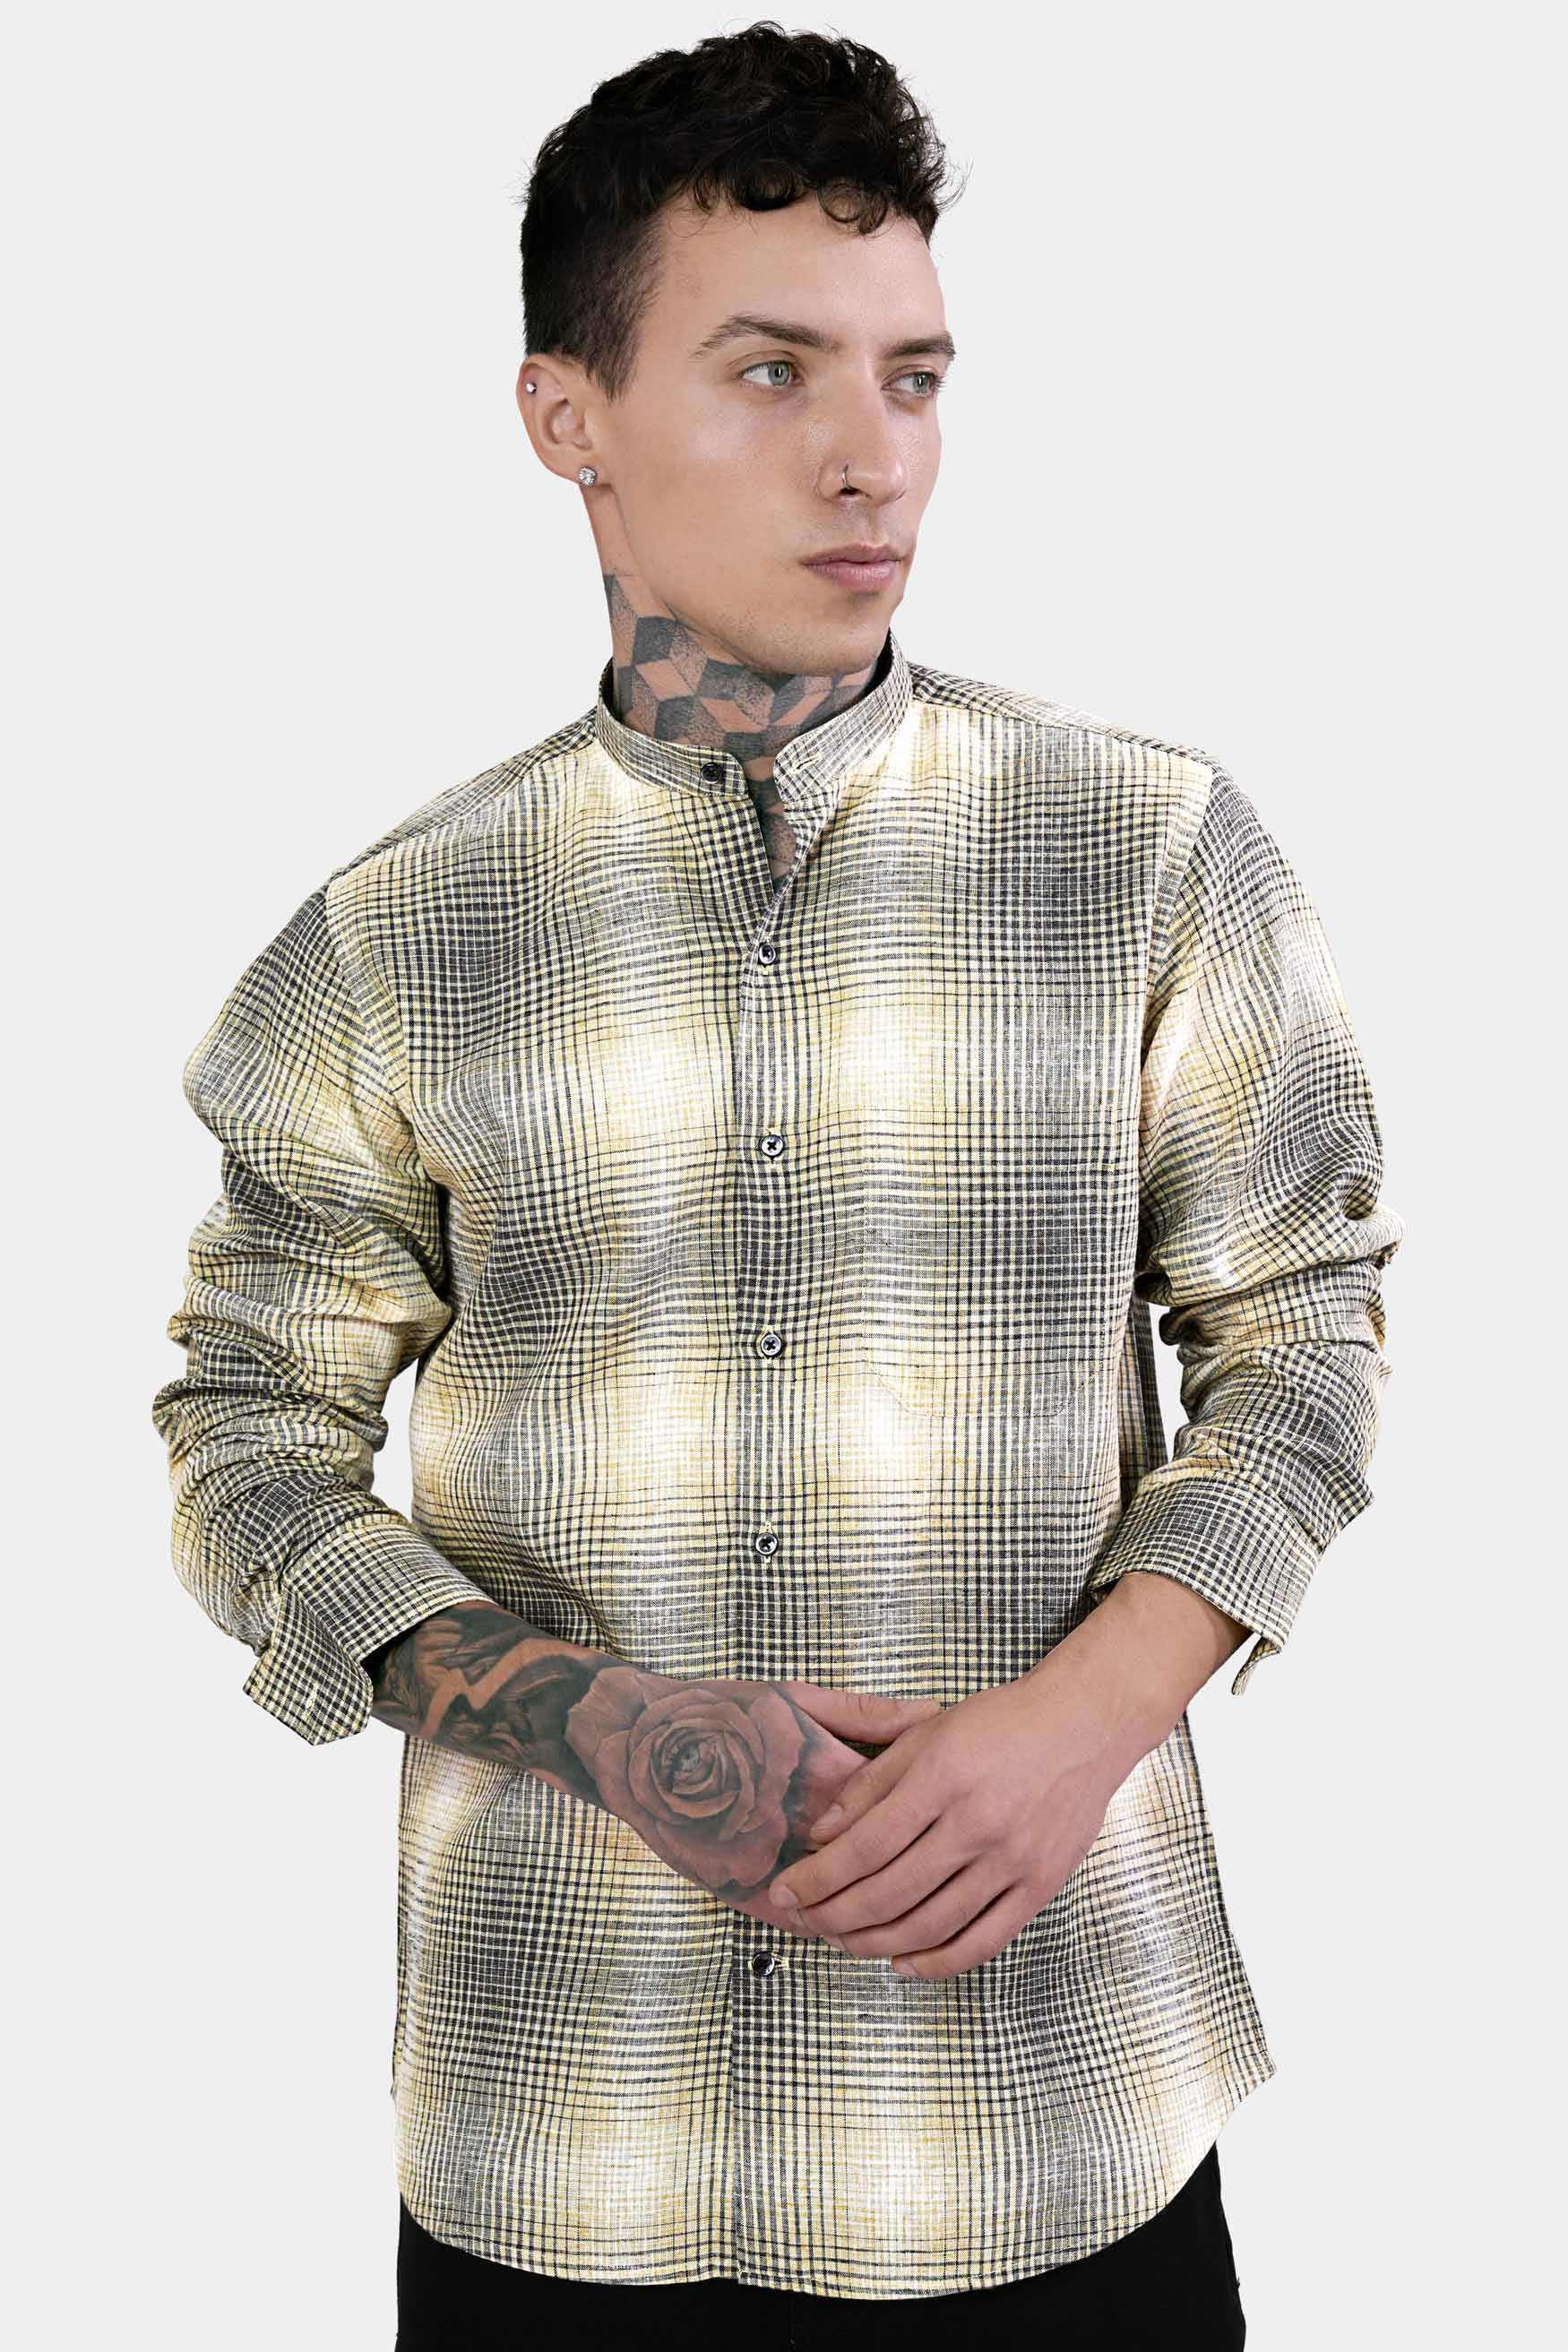 Chalky Brown and White Checkered Luxurious Linen Shirt 11411-M-BLK-38, 11411-M-BLK-H-38, 11411-M-BLK-39, 11411-M-BLK-H-39, 11411-M-BLK-40, 11411-M-BLK-H-40, 11411-M-BLK-42, 11411-M-BLK-H-42, 11411-M-BLK-44, 11411-M-BLK-H-44, 11411-M-BLK-46, 11411-M-BLK-H-46, 11411-M-BLK-48, 11411-M-BLK-H-48, 11411-M-BLK-50, 11411-M-BLK-H-50, 11411-M-BLK-52, 11411-M-BLK-H-52